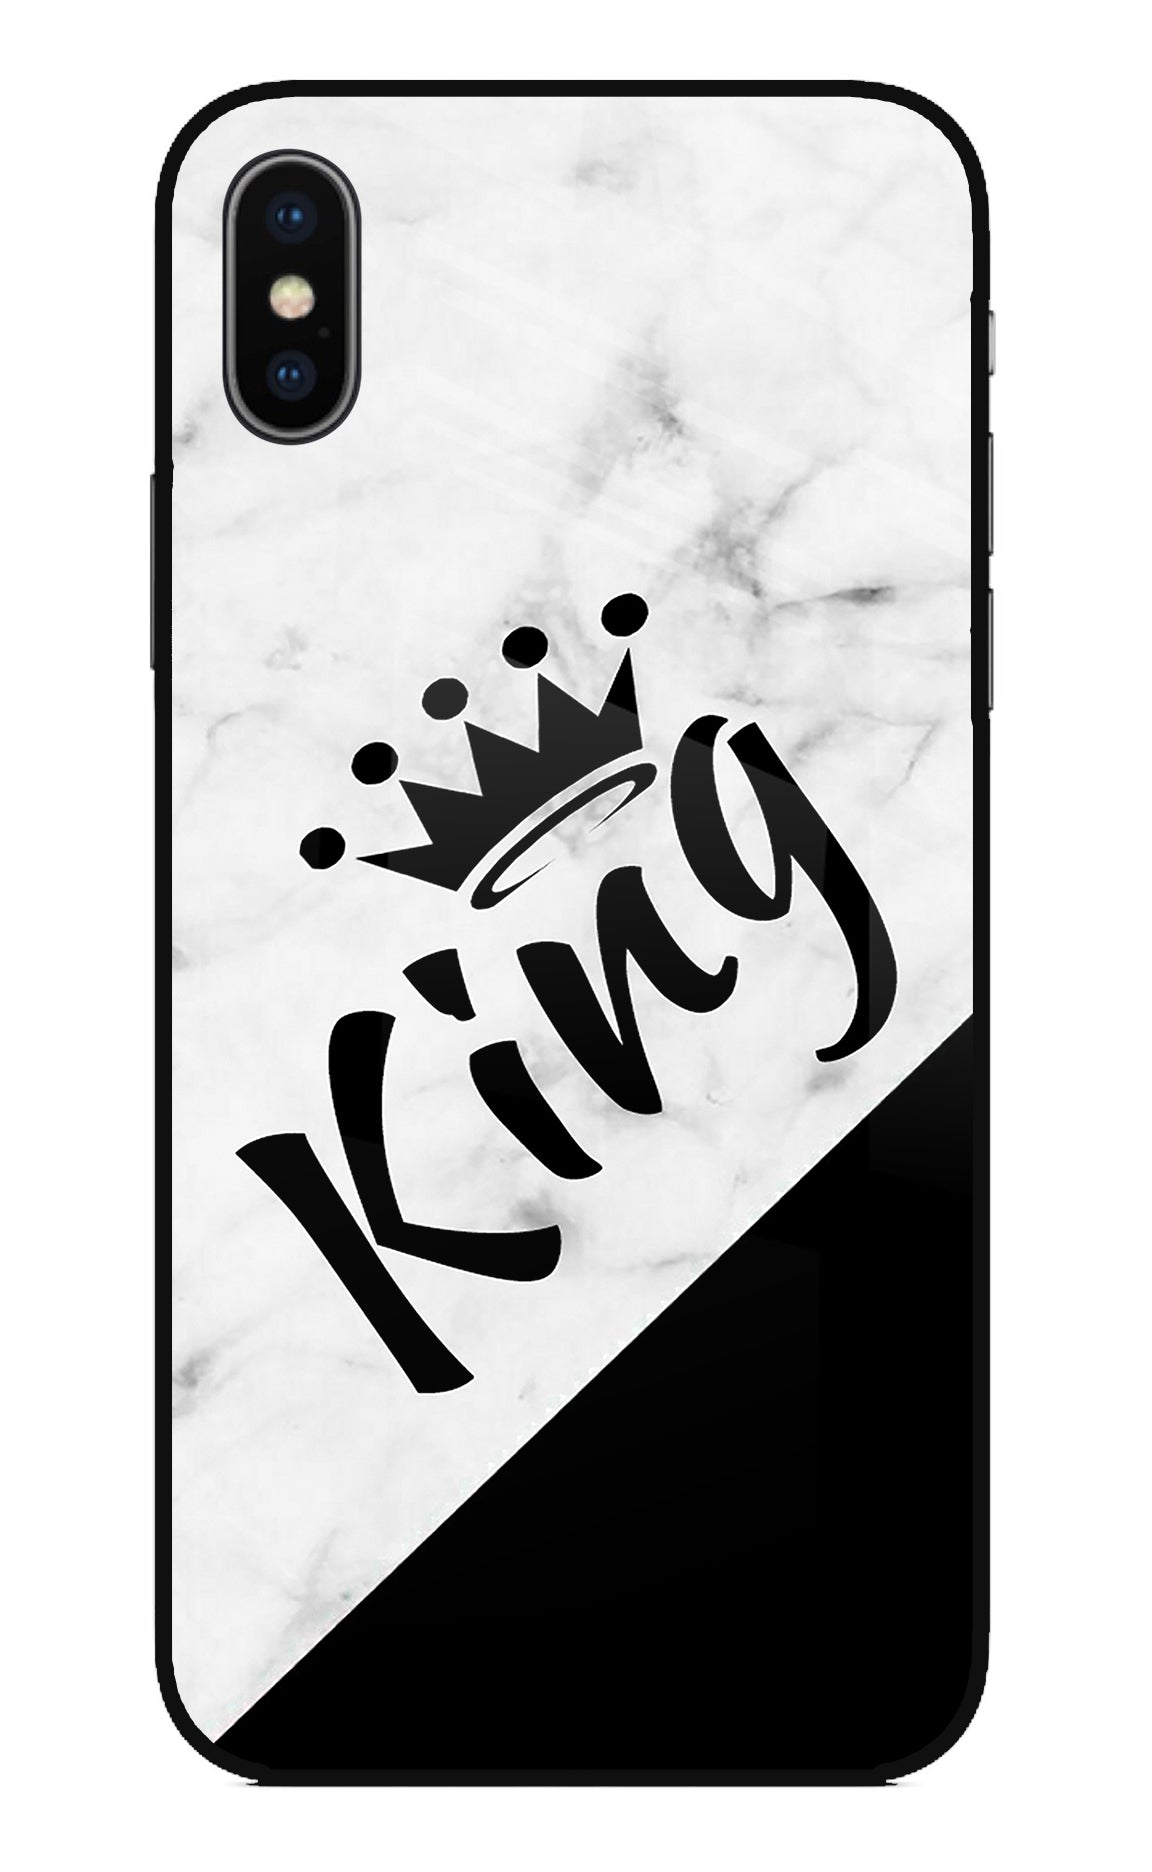 King iPhone XS Back Cover